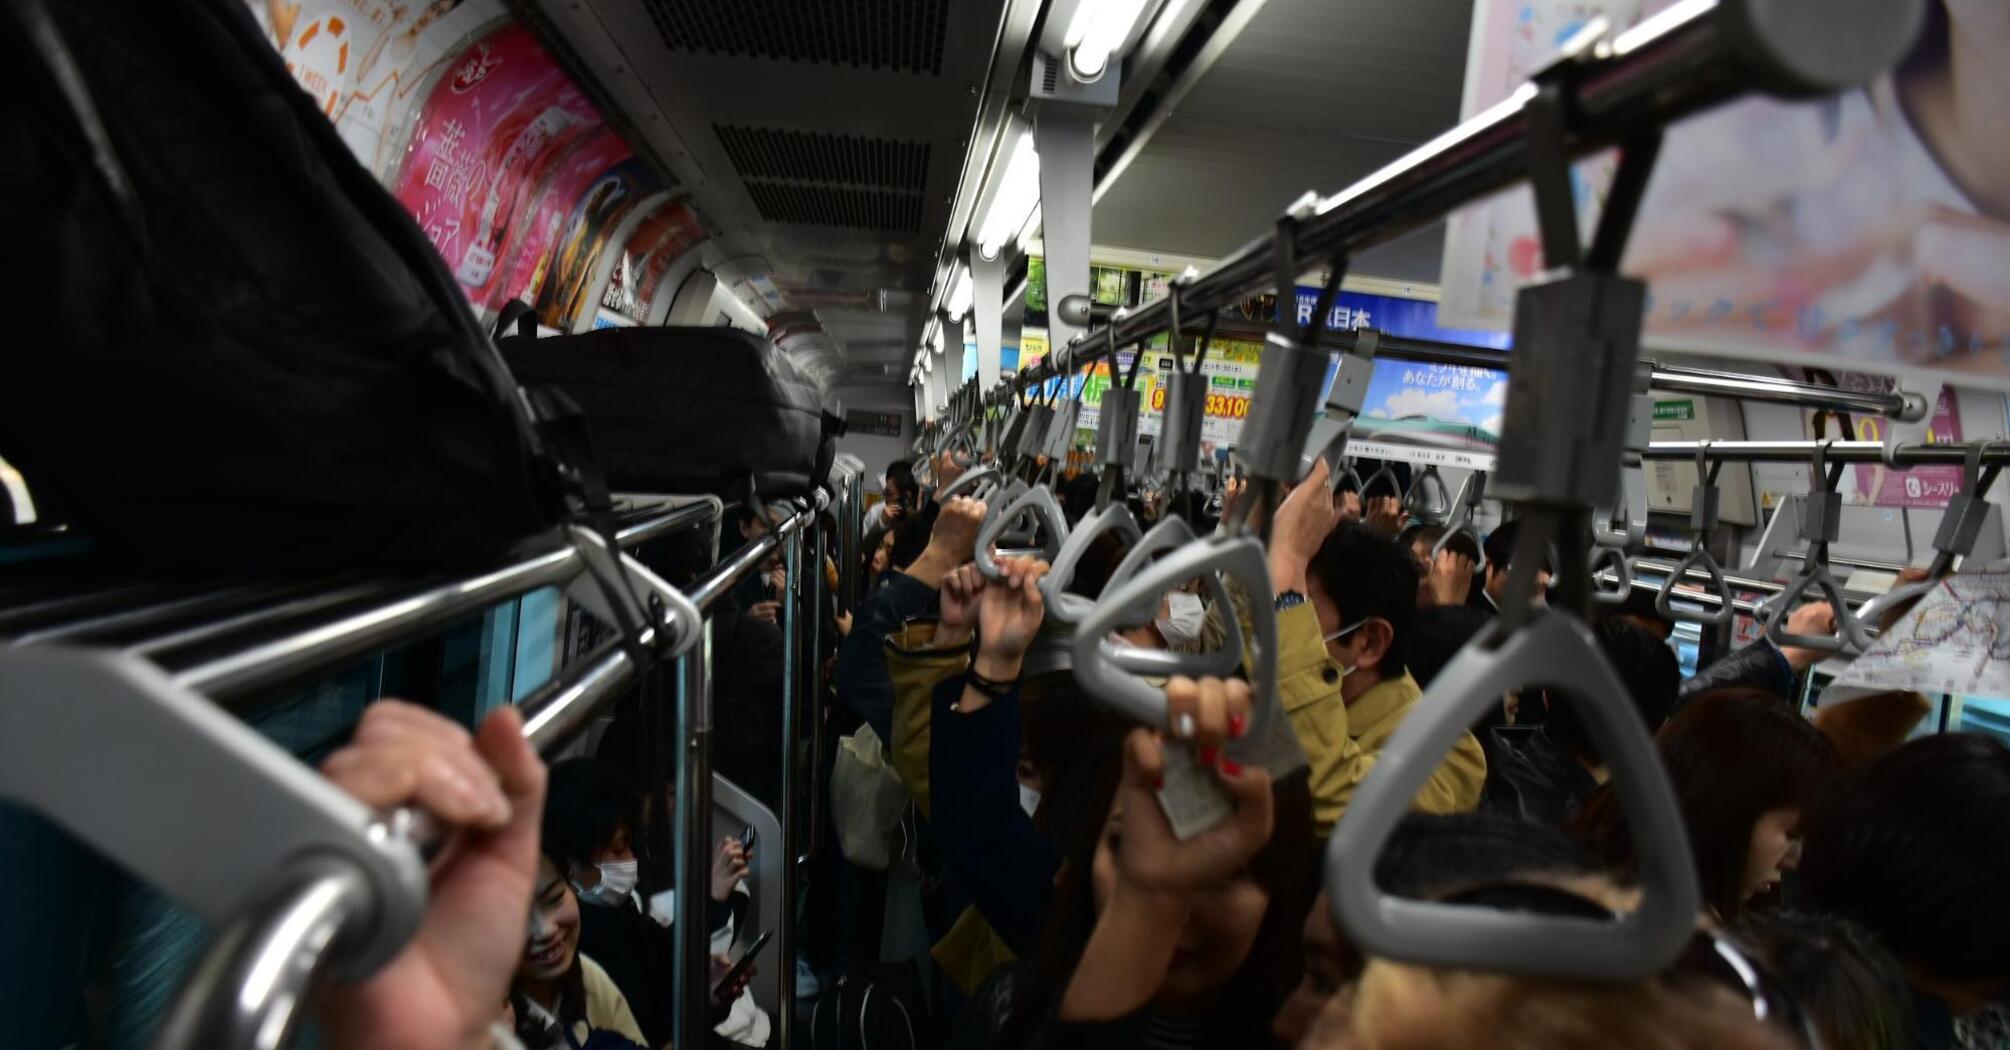 People in masks in a crowded subway holding handrails